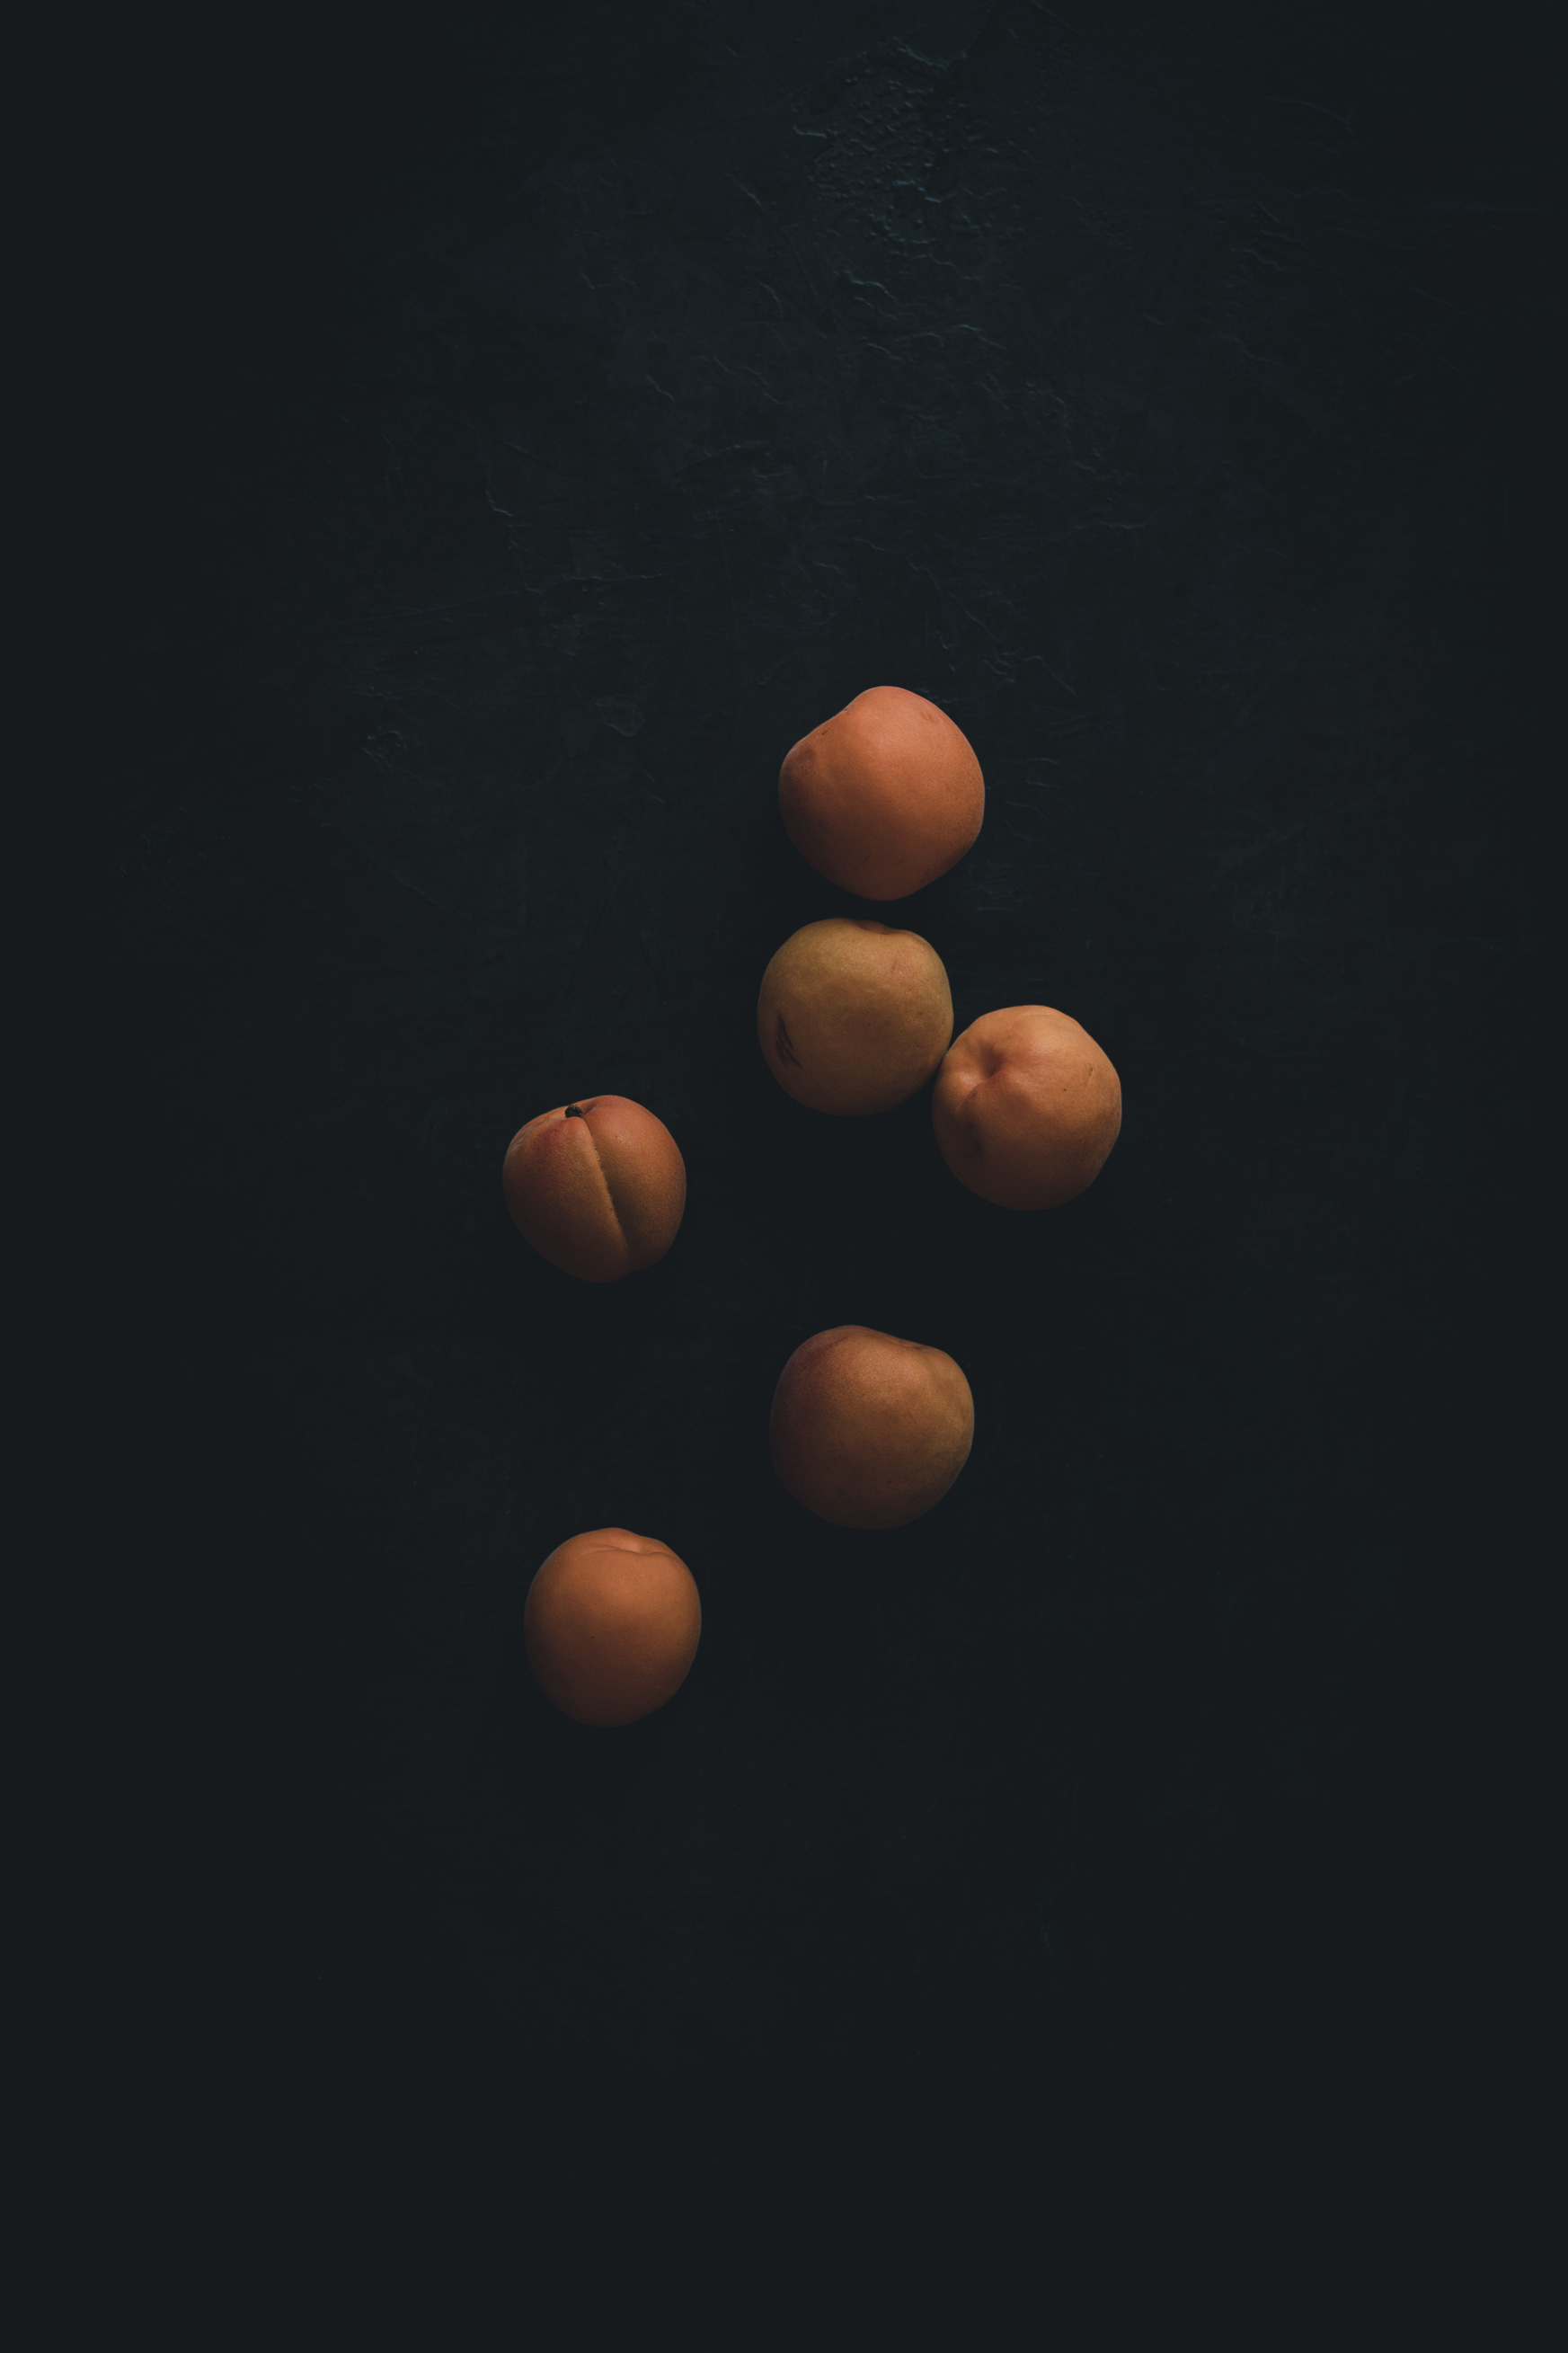 Apricots on a black background from the Moody Food series by John Robson Photography